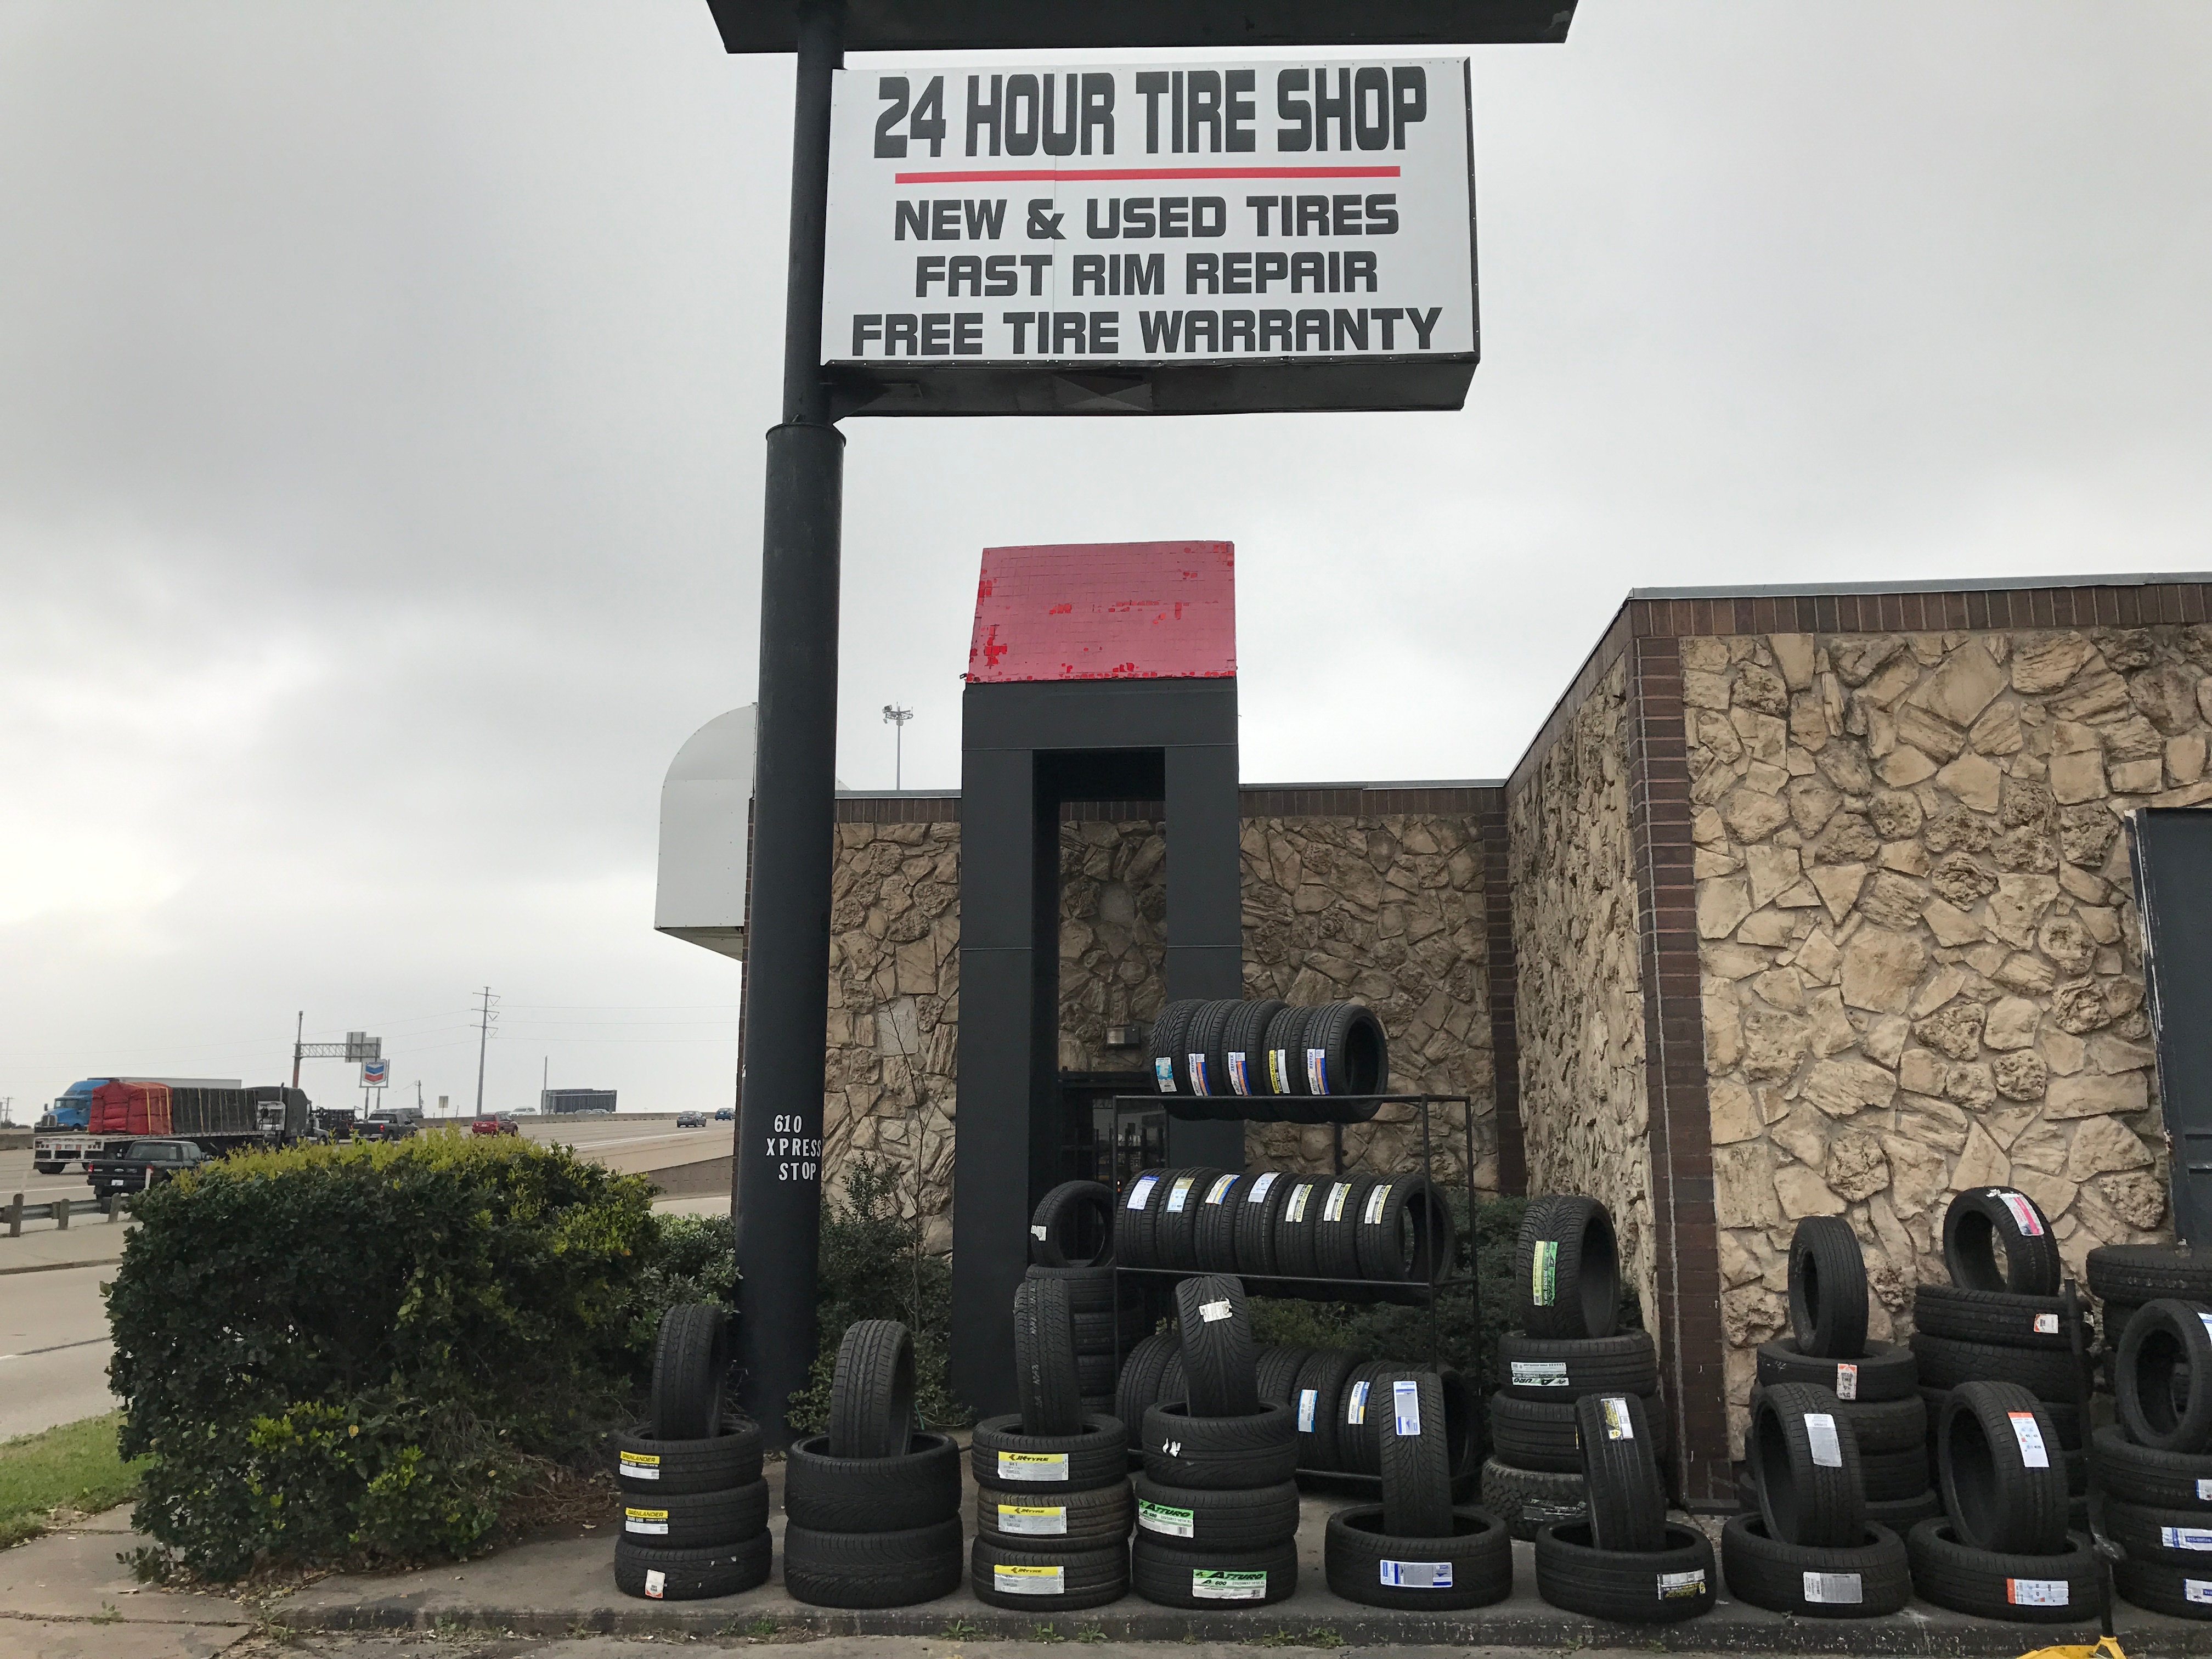 24 Hour Tire Shop Houston Coupons near me in Houston | 8coupons